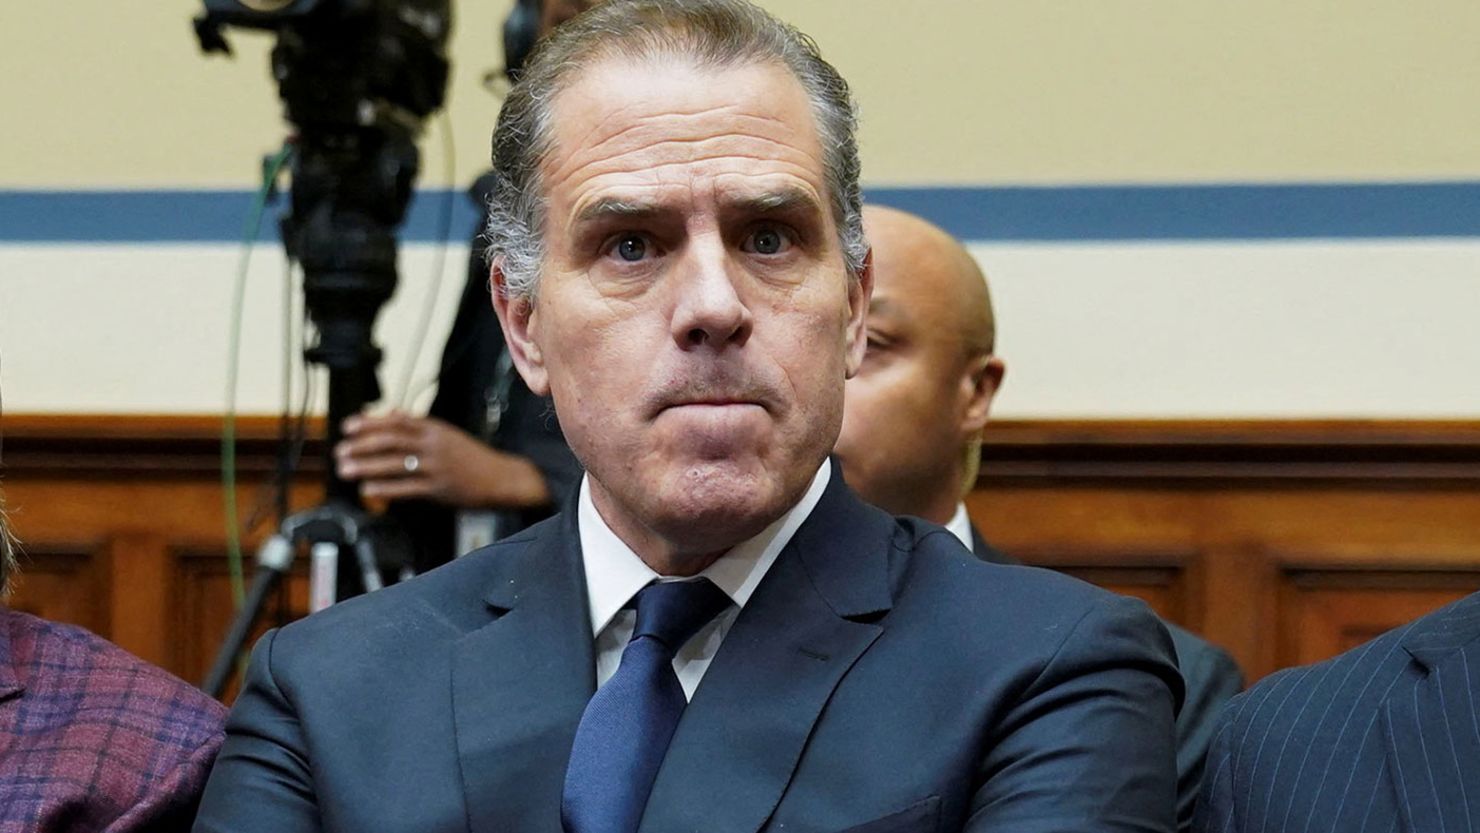 Hunter Biden, son of President Joe Biden, makes a surprise appearance at a House Oversight Committee markup and meeting on Capitol Hill in Washington on January 10, 2024.